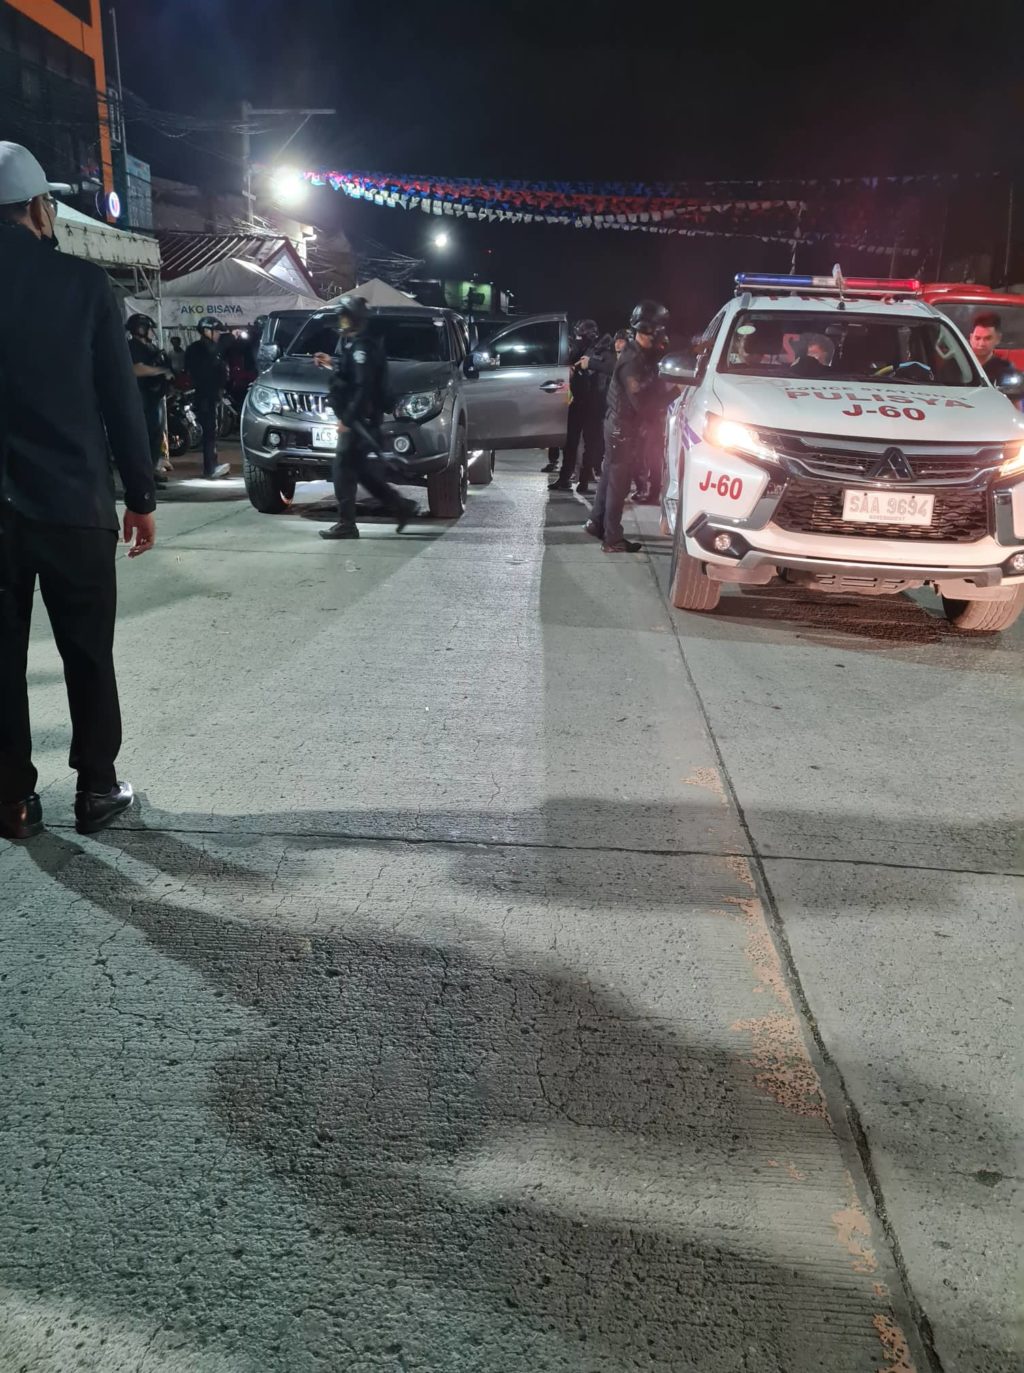 Police arrest Police Captain Adulfo Abrigana Jr. of the Cebu Port Authority past midnight Tuesday, September 6, after he was accused of indiscriminately firing his 9 mm pistol near the Barangay Hall of Brgy. San Roque, Cebu City. | Contributed photo